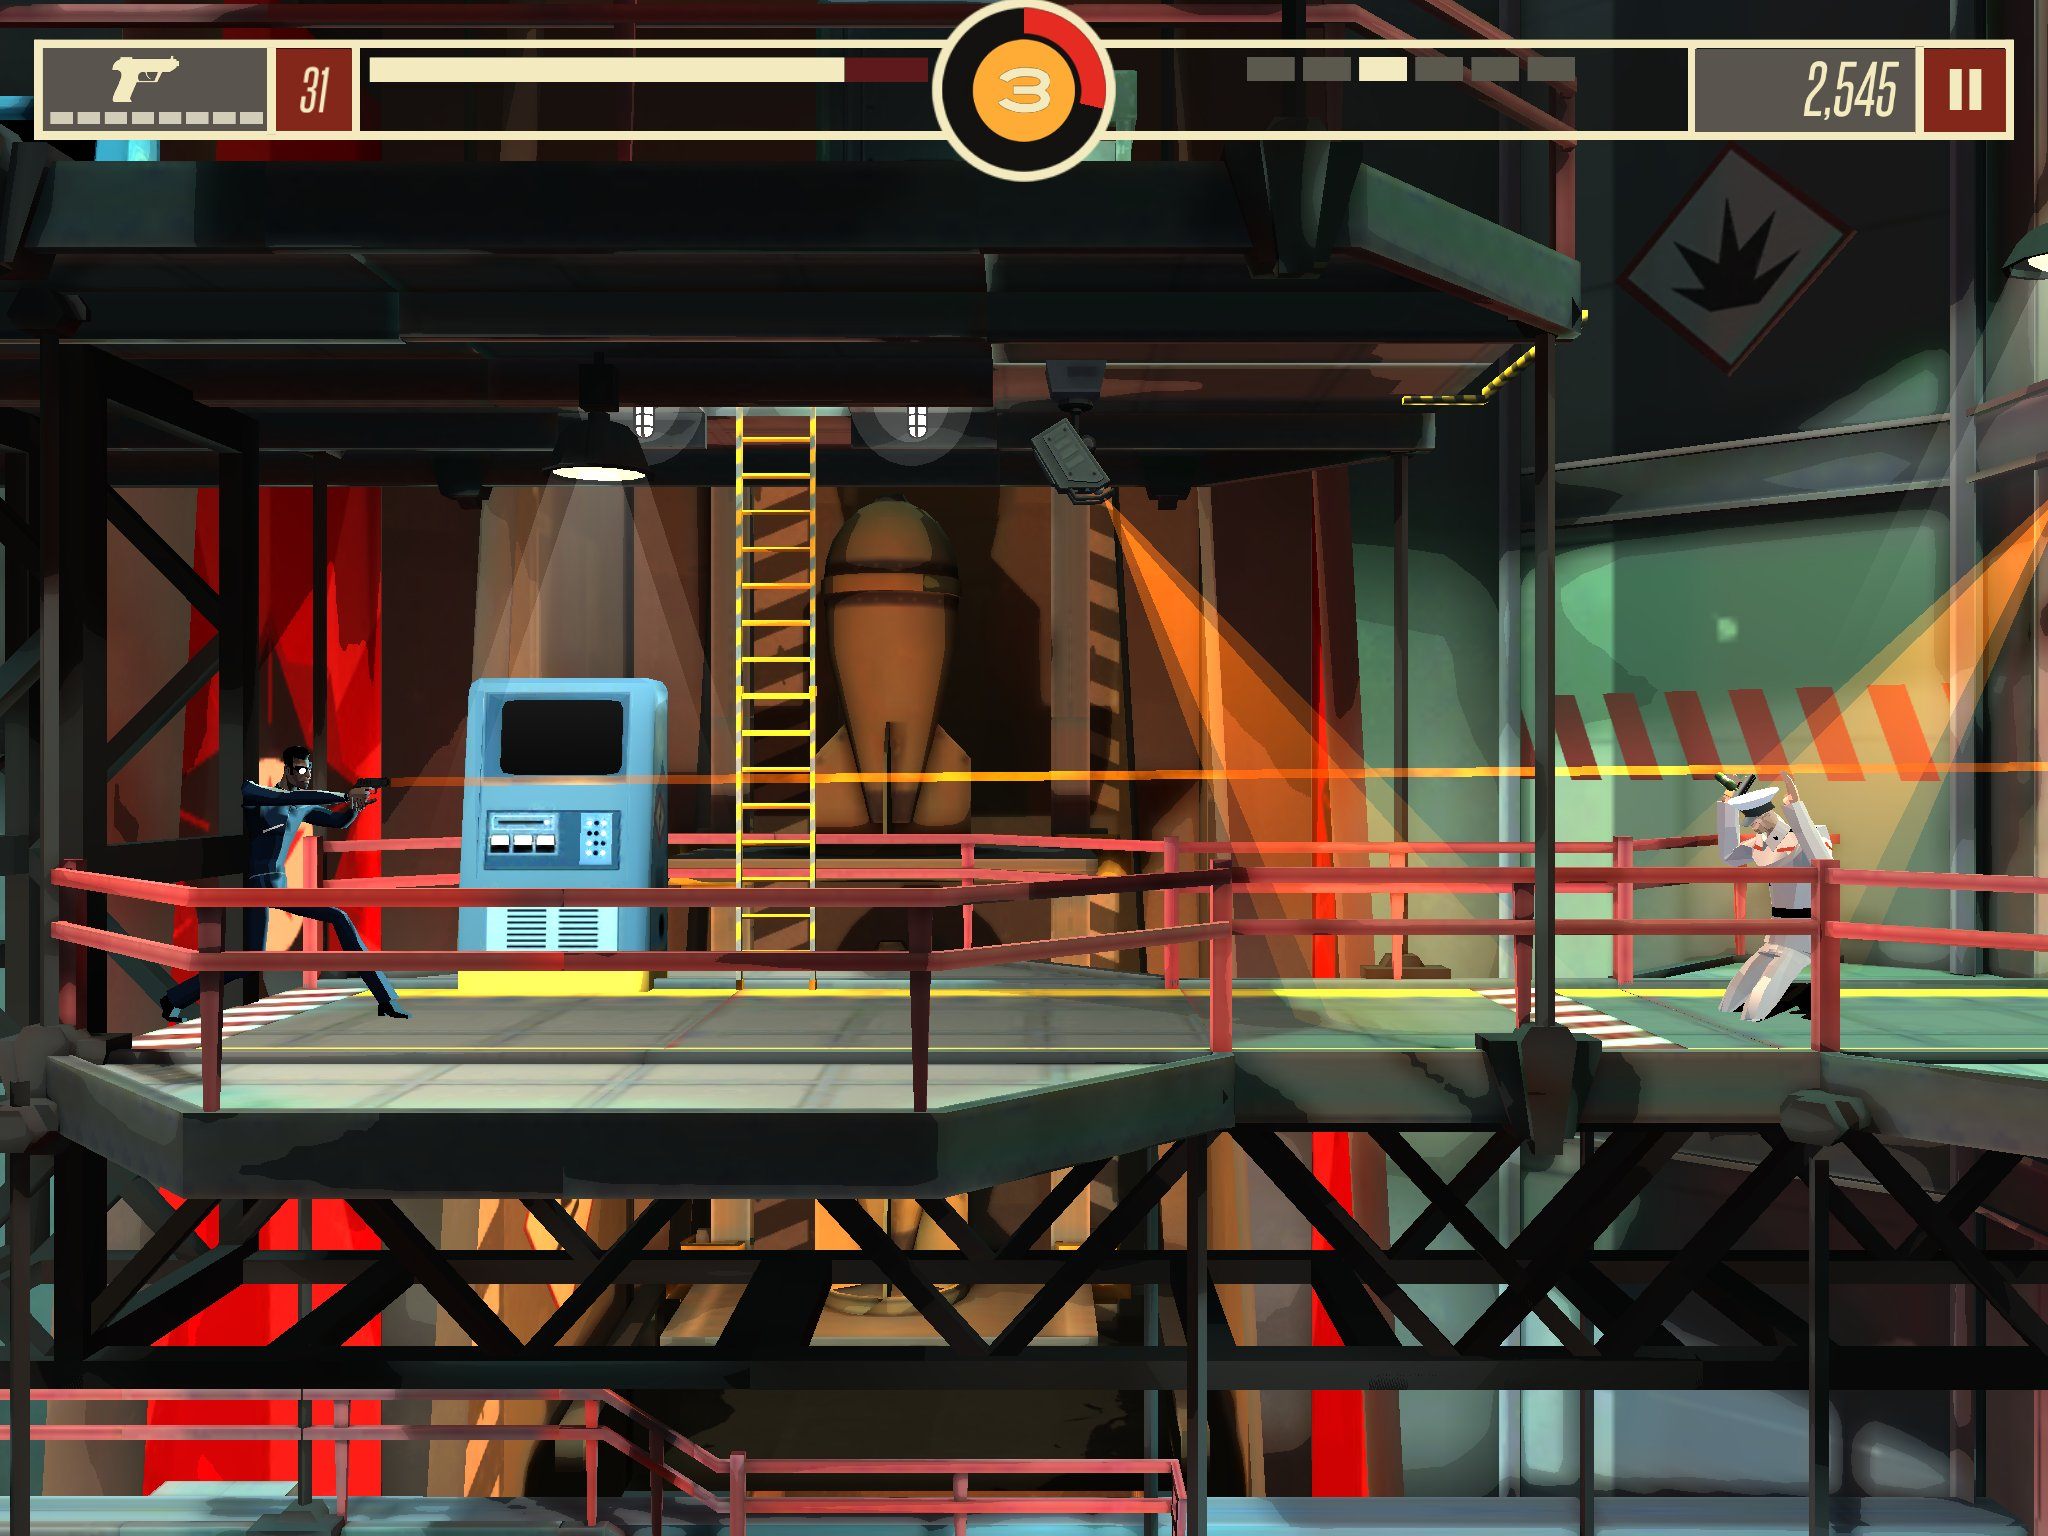 CounterSpy 7